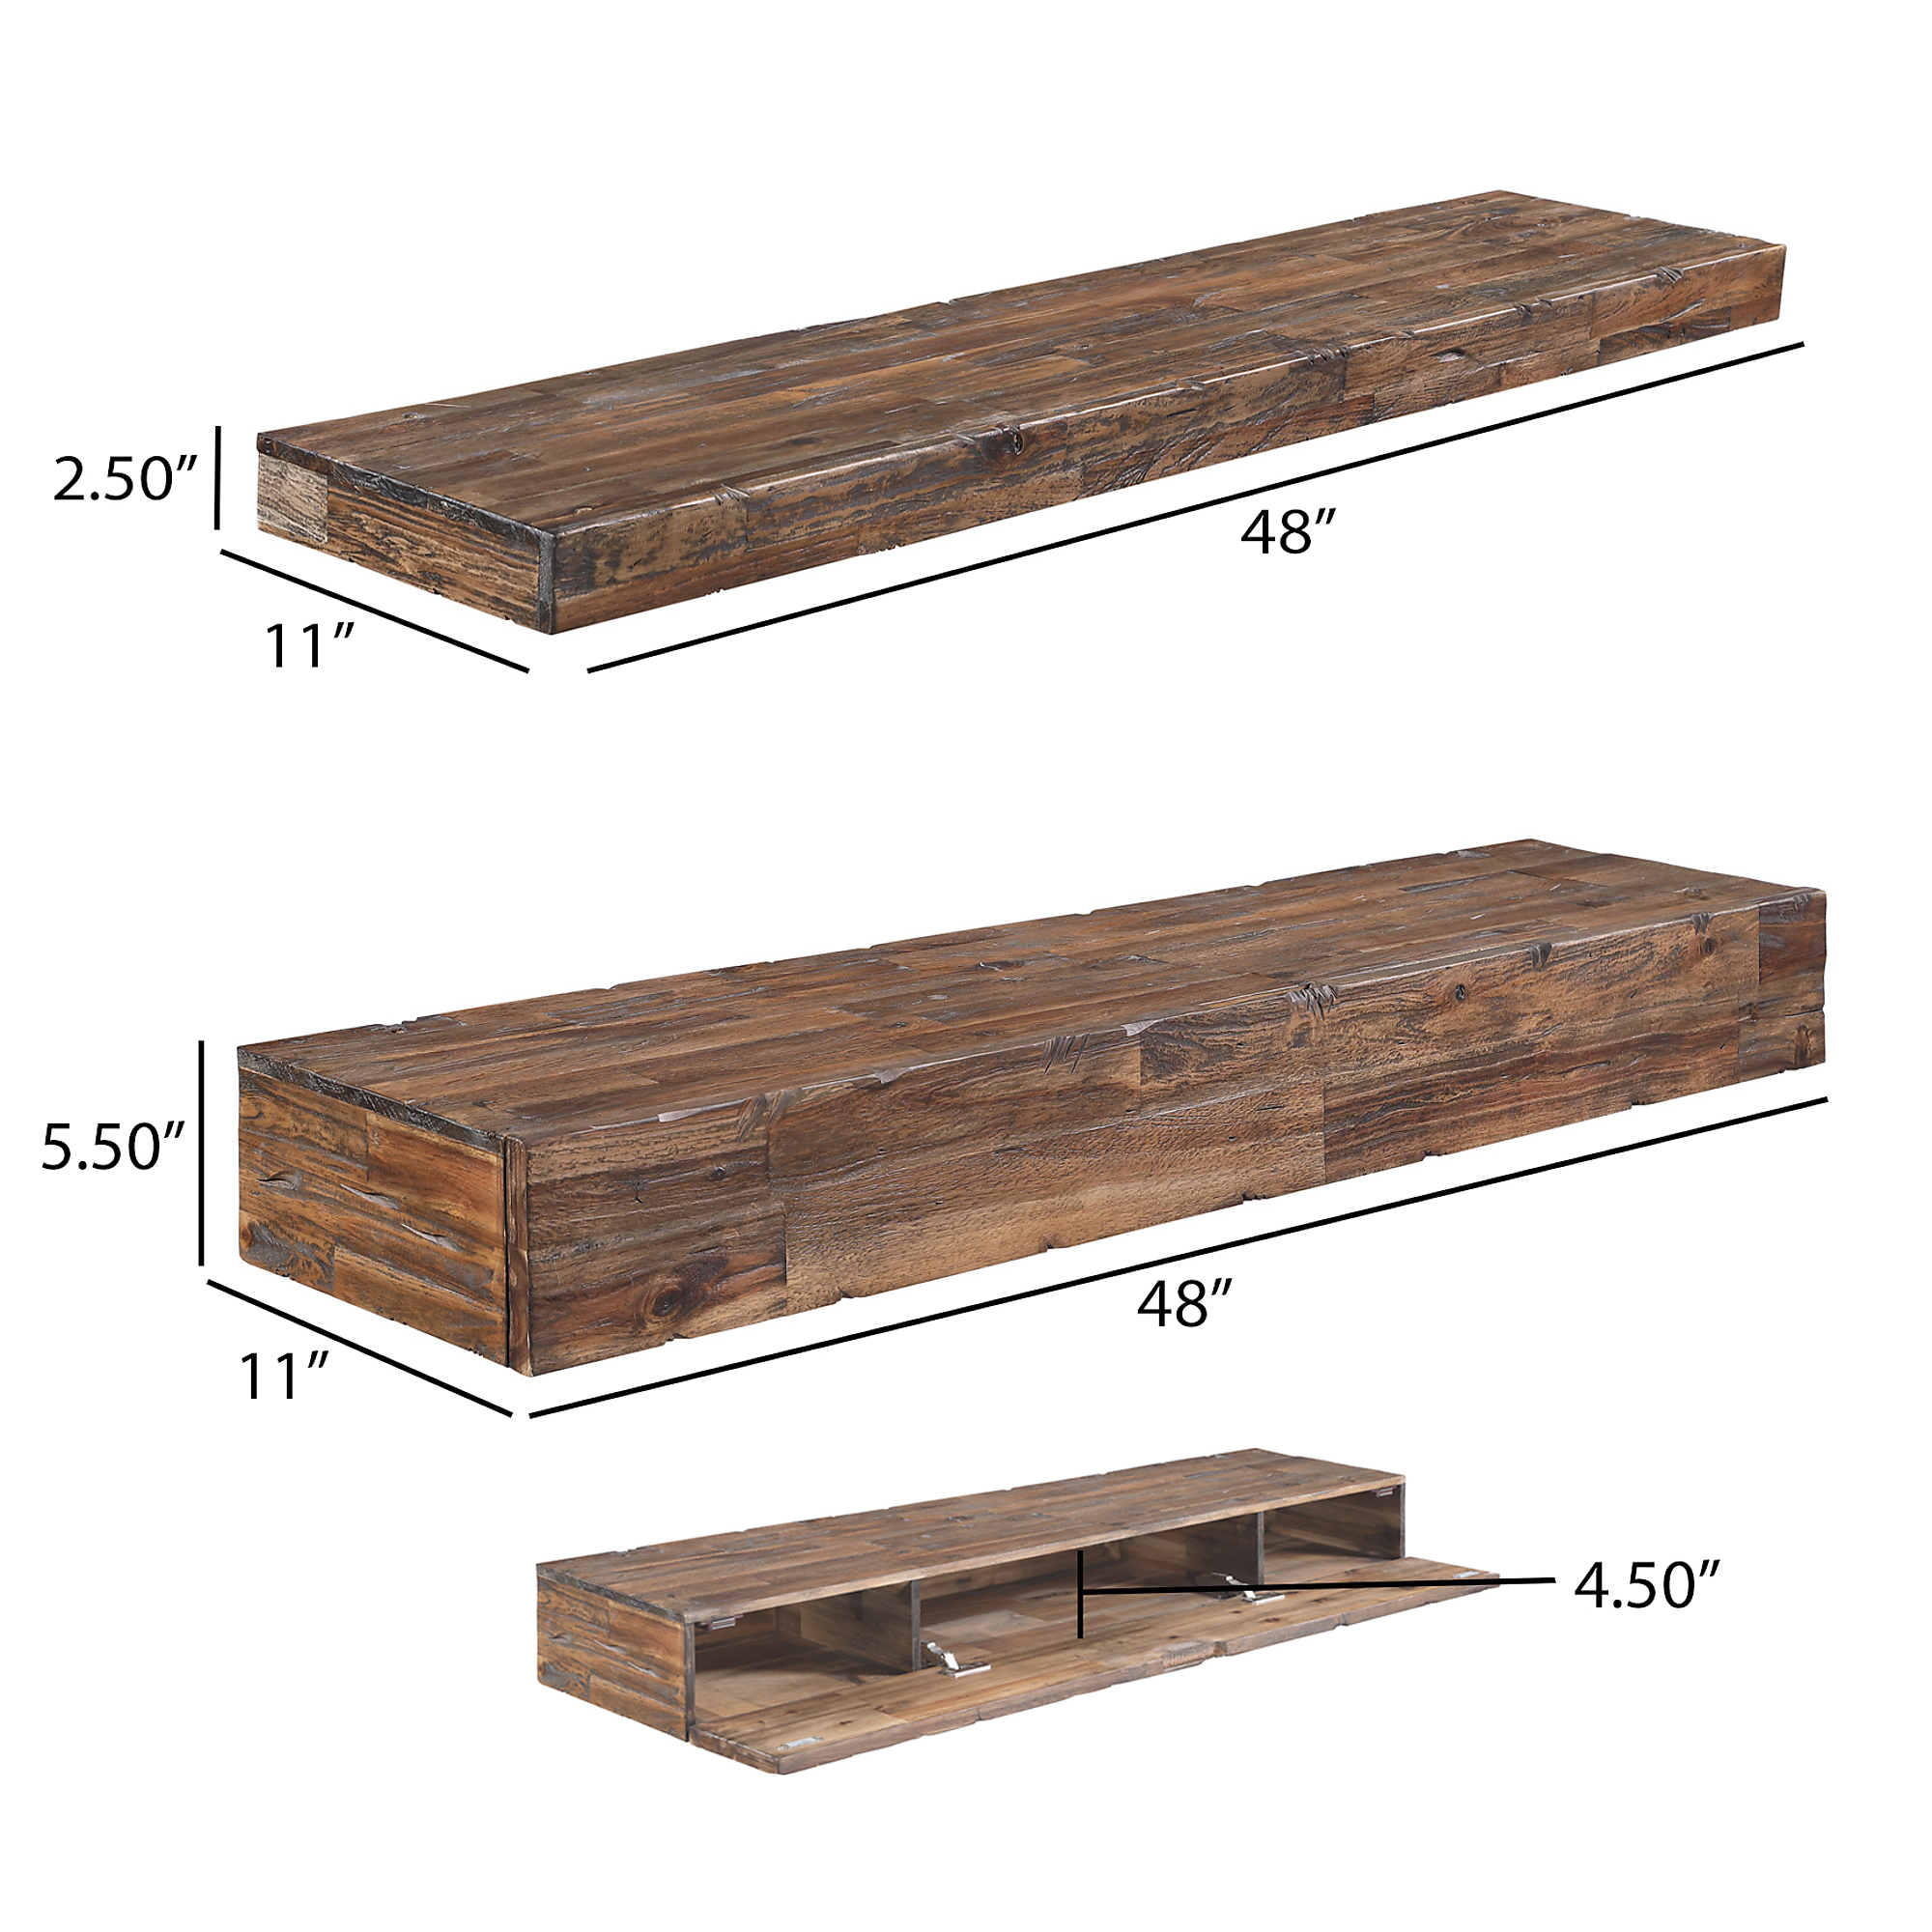 Merry Products, Distressed Floating Shelves W/ Hidden Storage,3Pc, Width 11.02 in, Depth 48.03 in, Material Wood, Model SLF0340115010